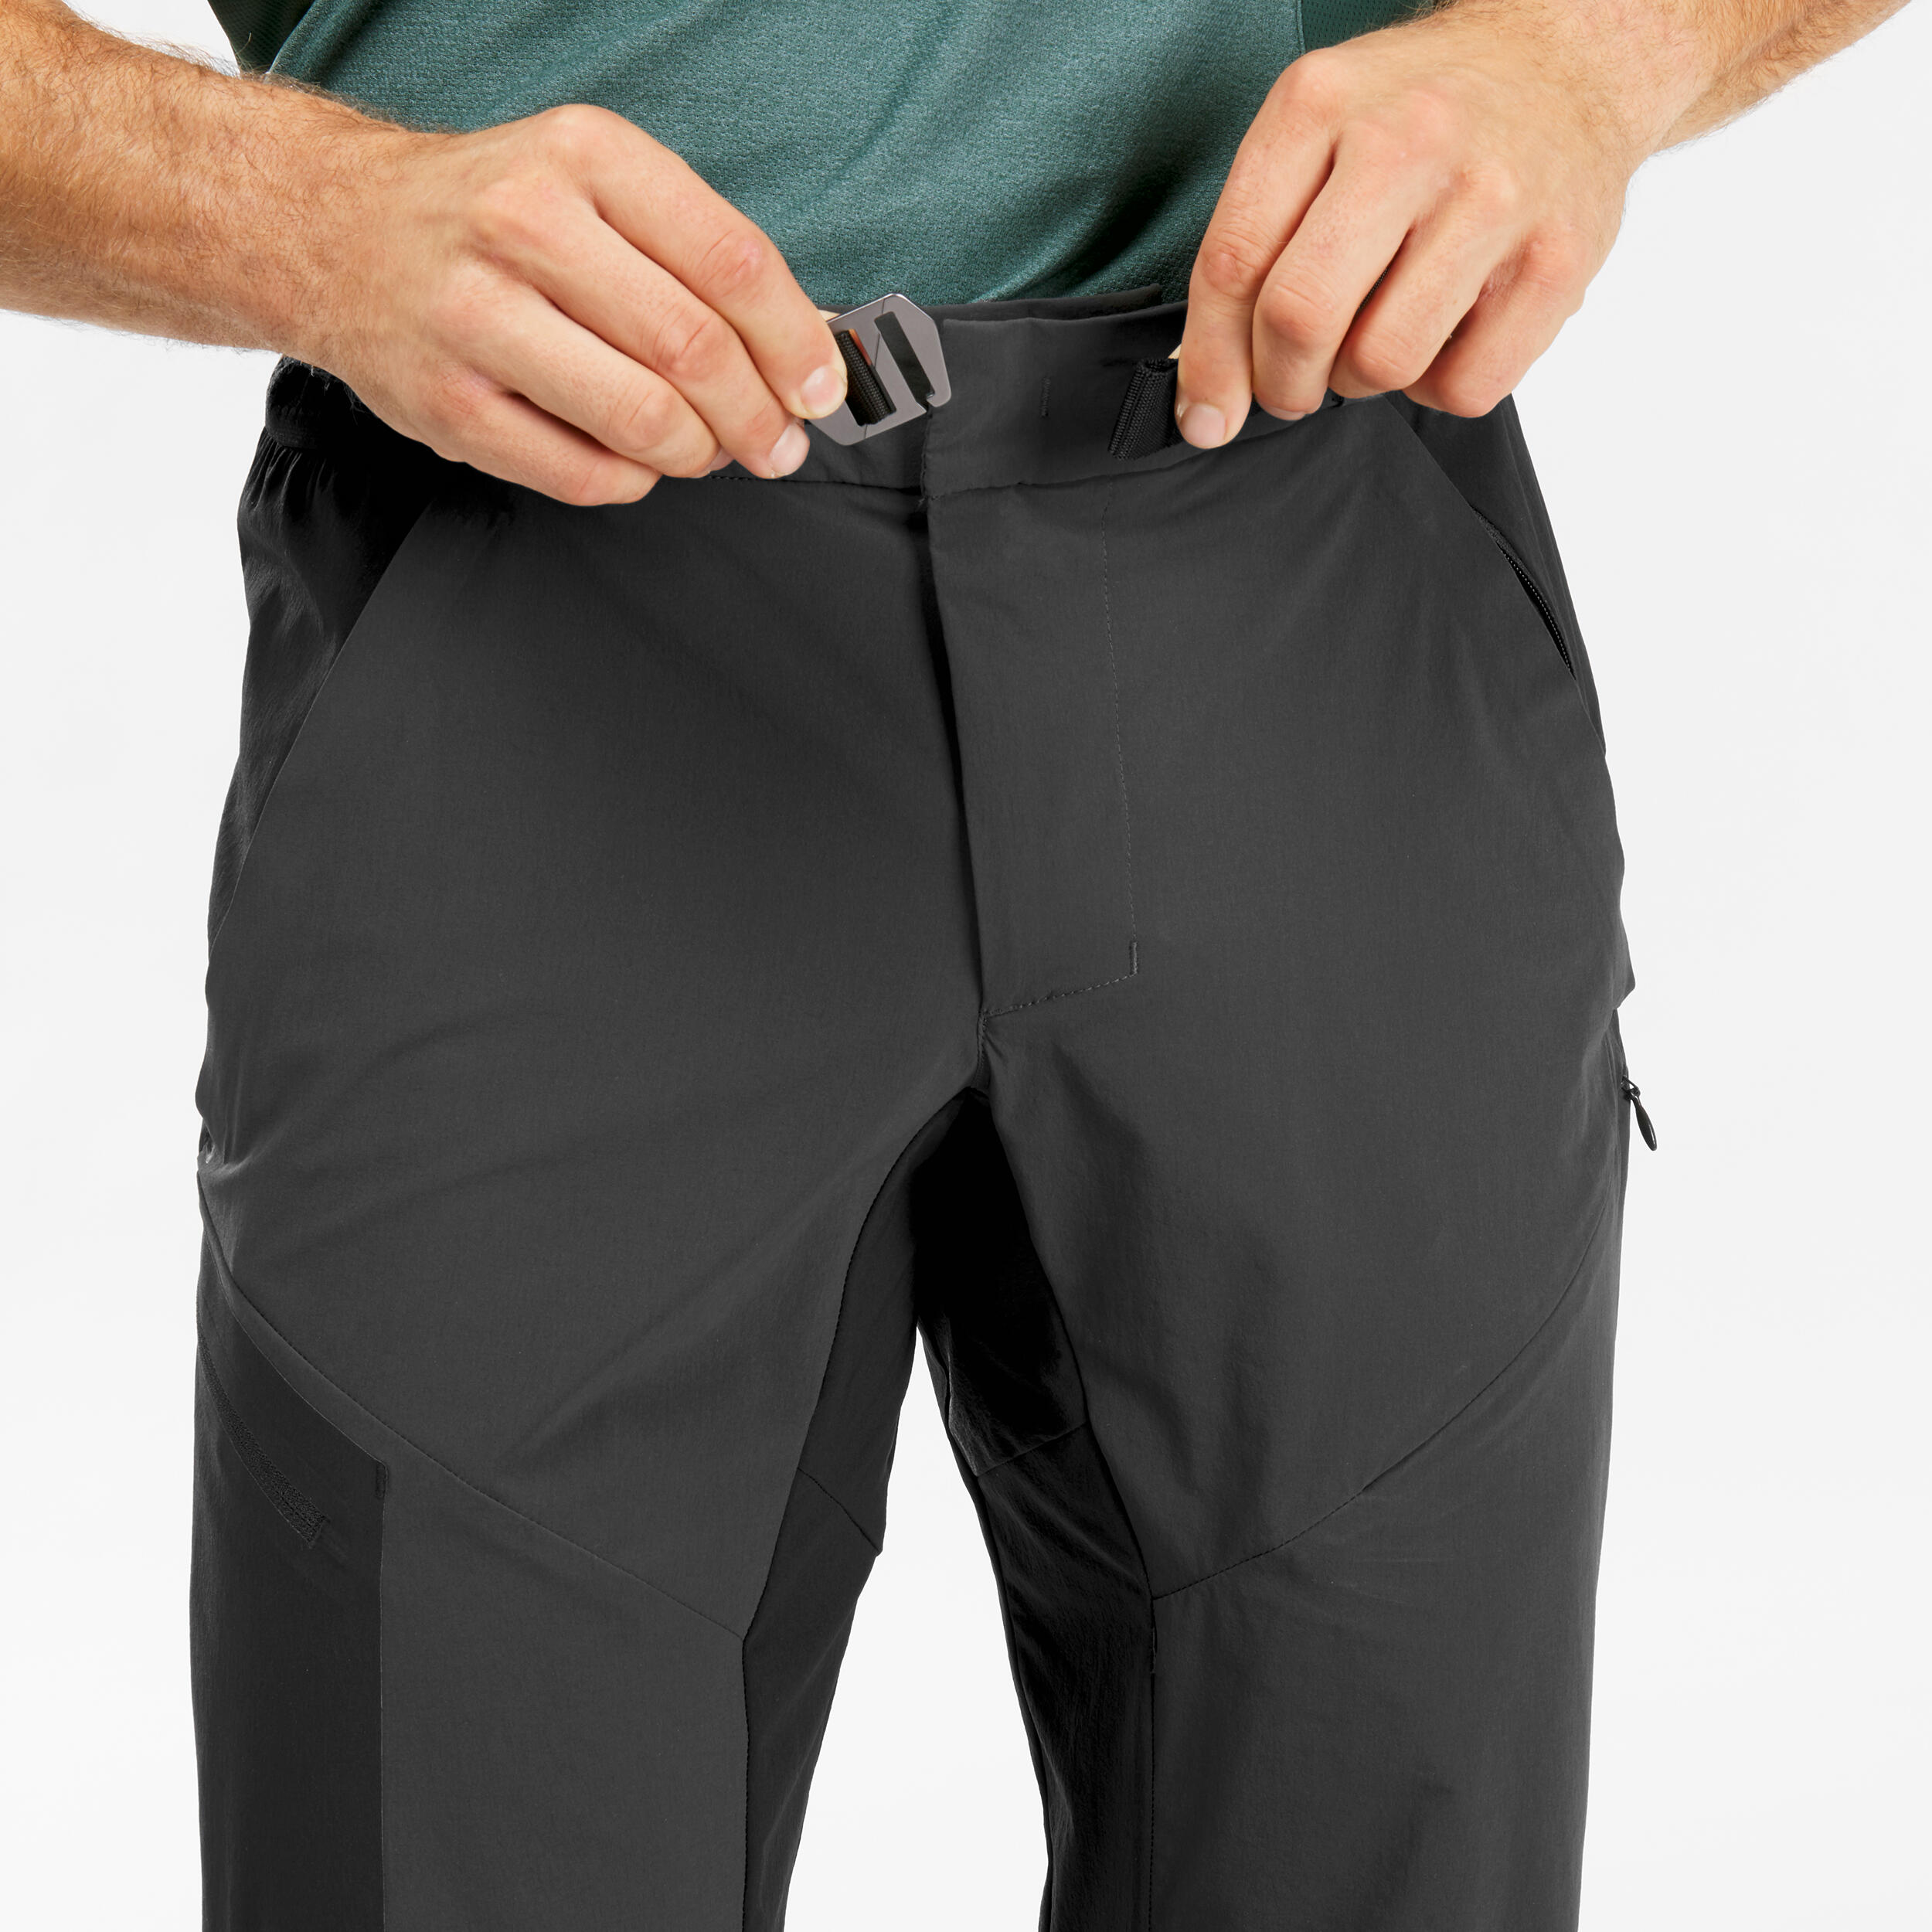 Aggregate more than 83 hiking trousers india latest - in.cdgdbentre